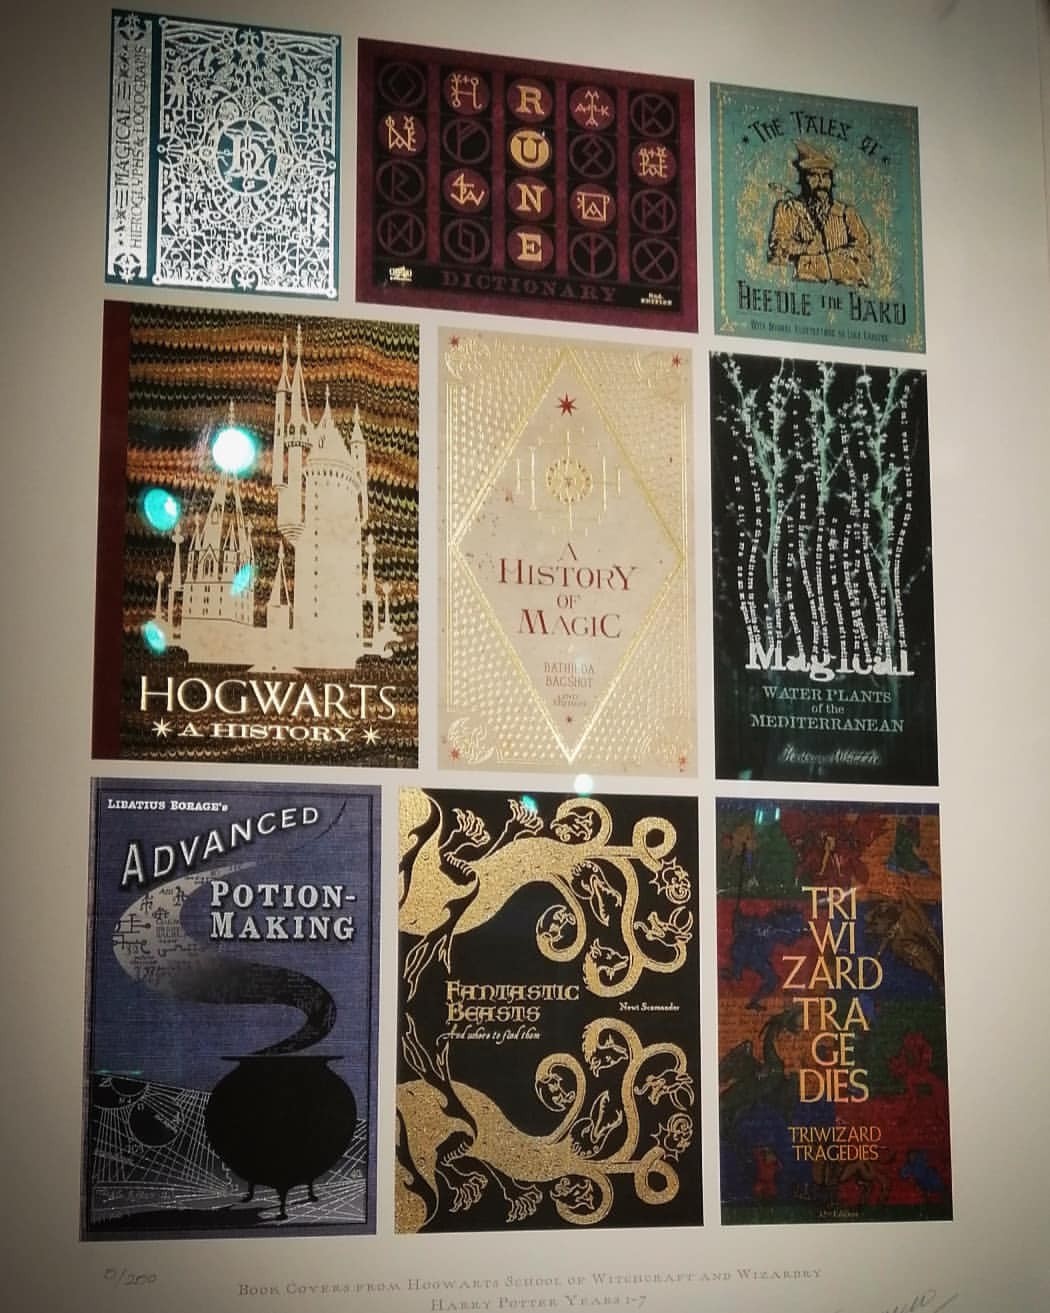 The textbook cover designs are so intricate with their embossed and gilded surfaces that it’s a shame we only catch a brief glimpse of them in the films.